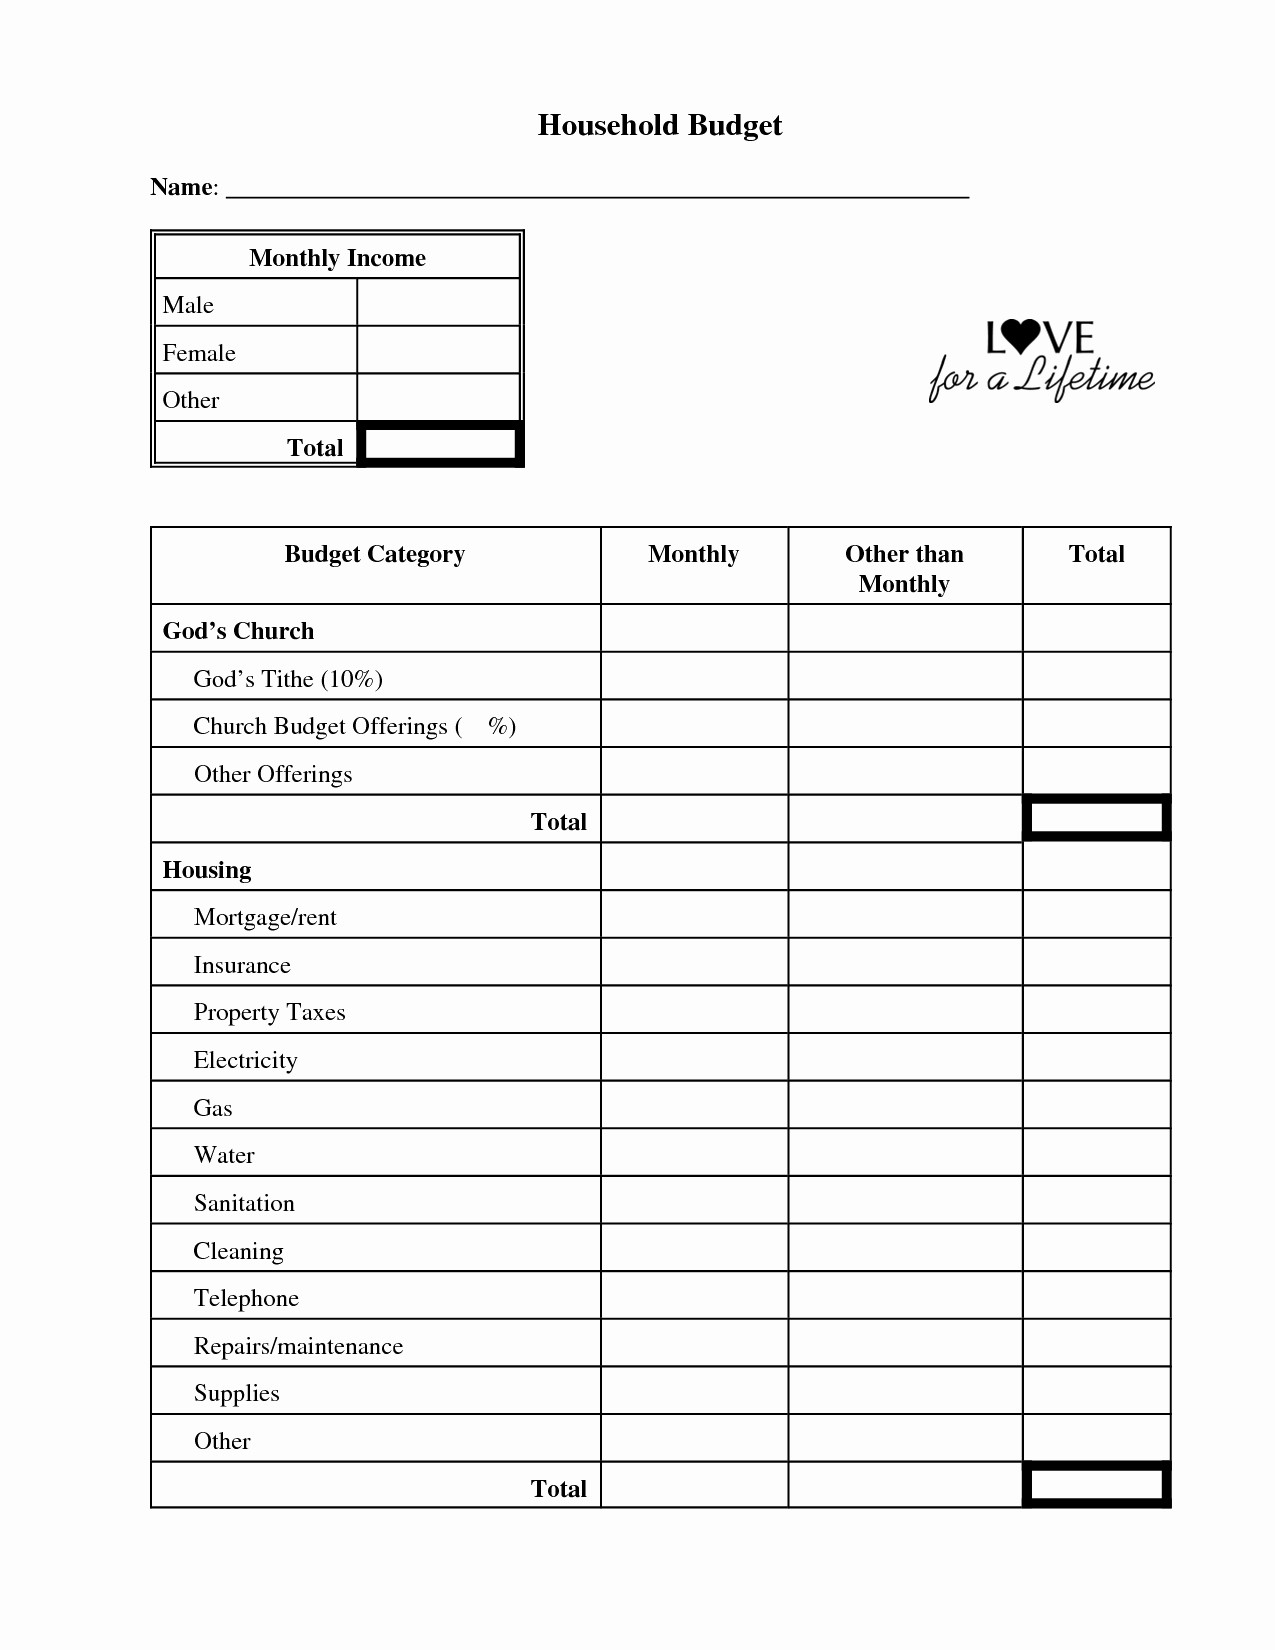 50 Inspirational Ohio Child Support Worksheet Excel DOCUMENTS Document